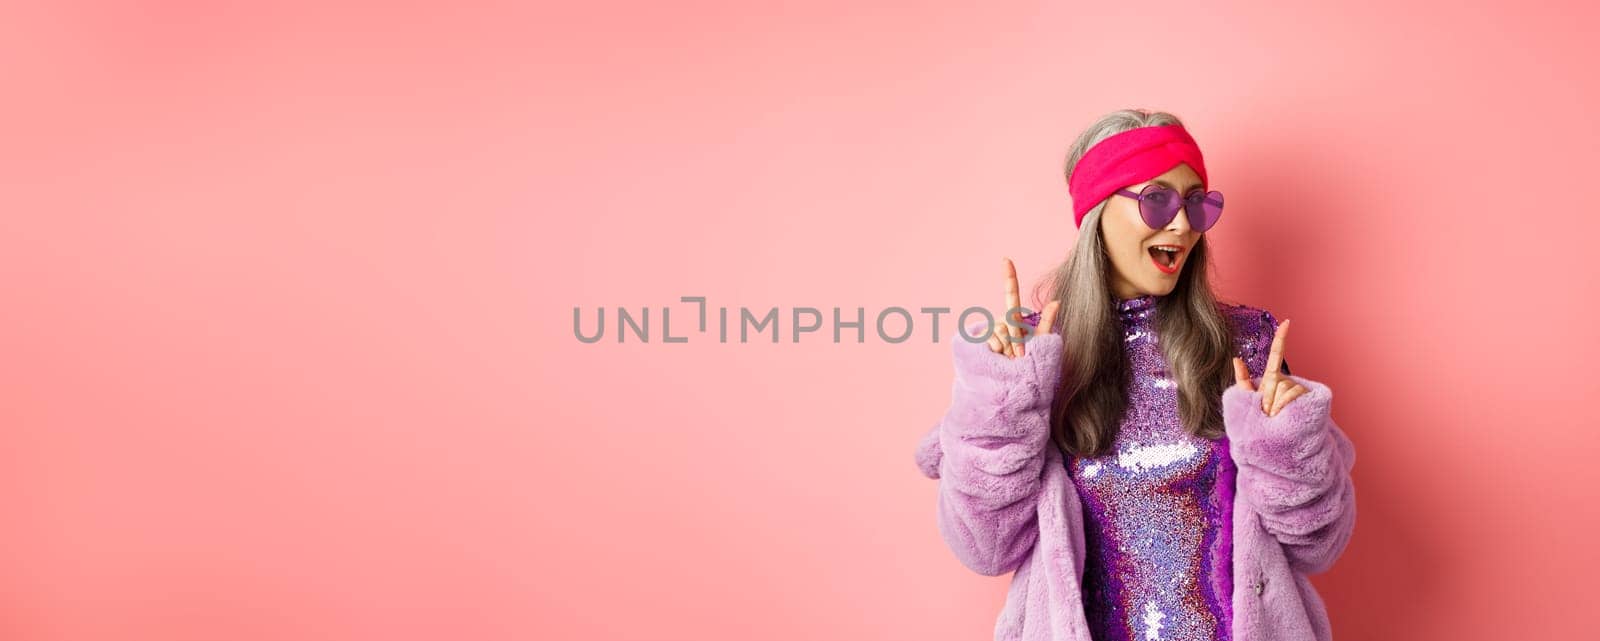 Hipster granny in sunglasses and glittering dress posing for photo with peace, victory signs, standing sassy against pink background.